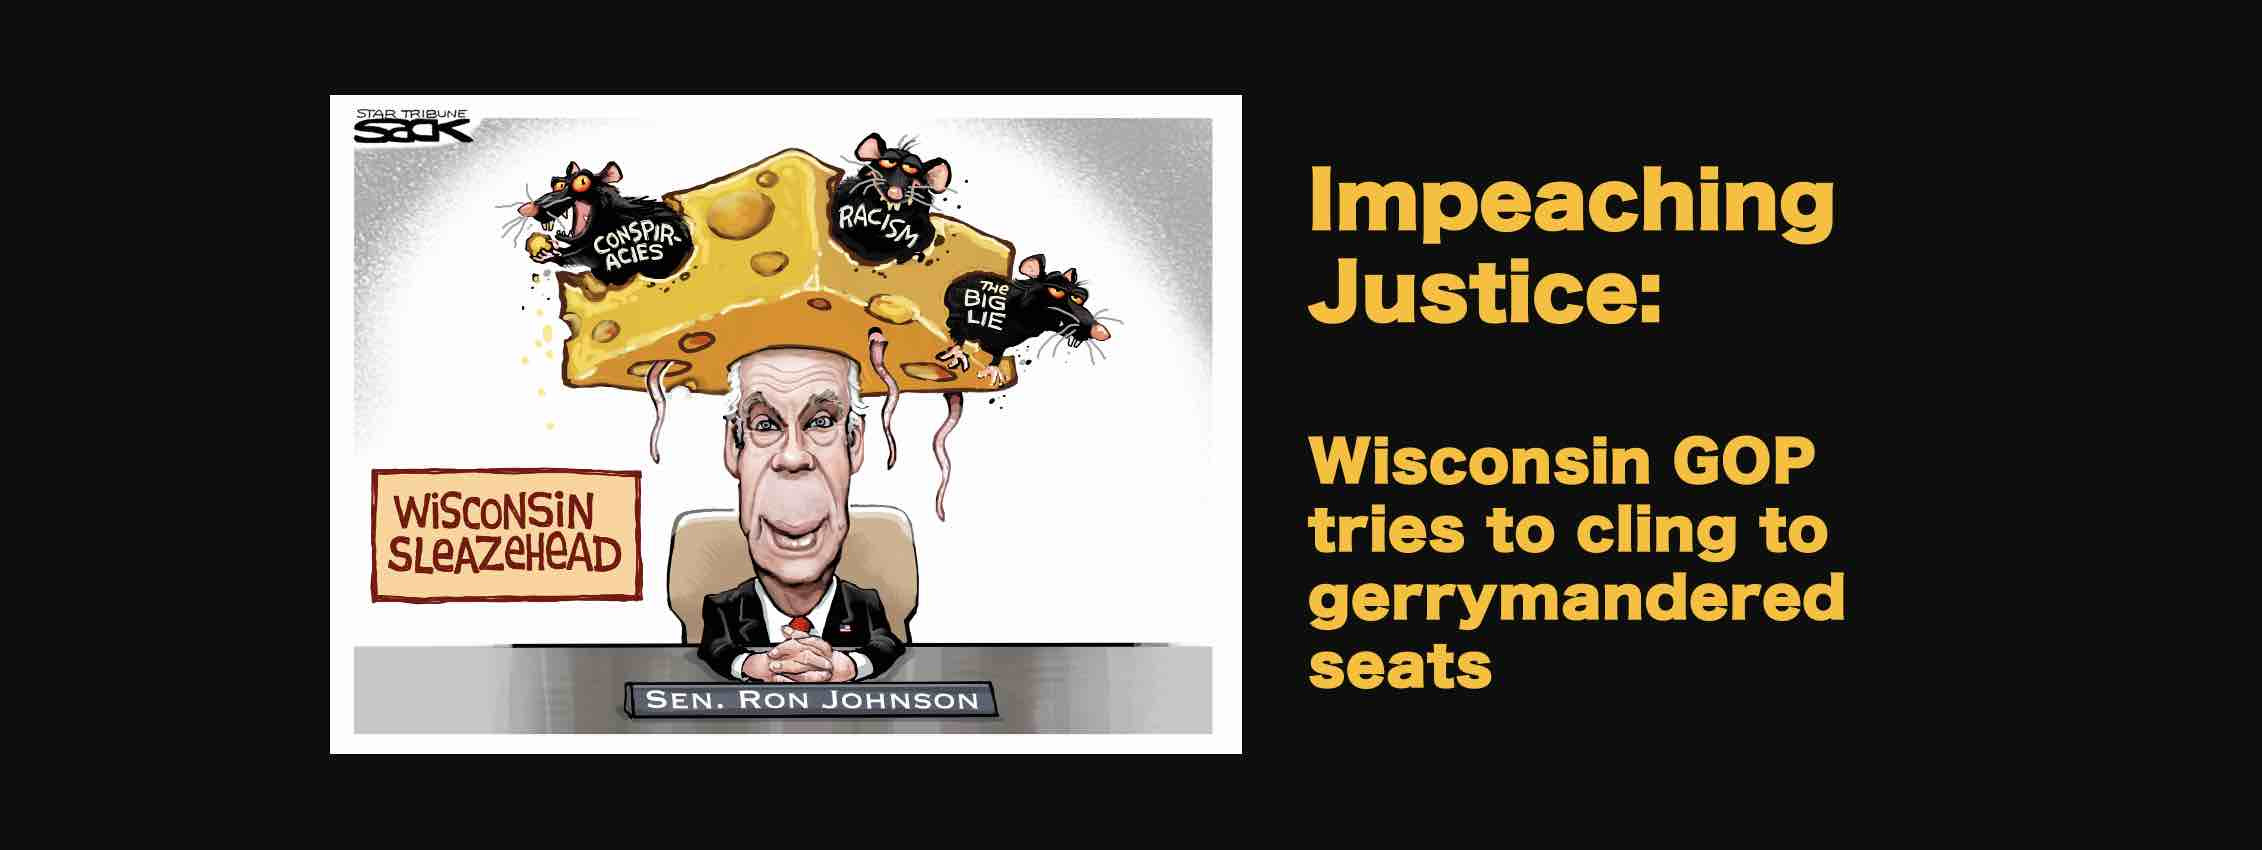 Wisconsin Republicans try to cling to their gerrymandered seats by impeaching new Justice that the people voted for